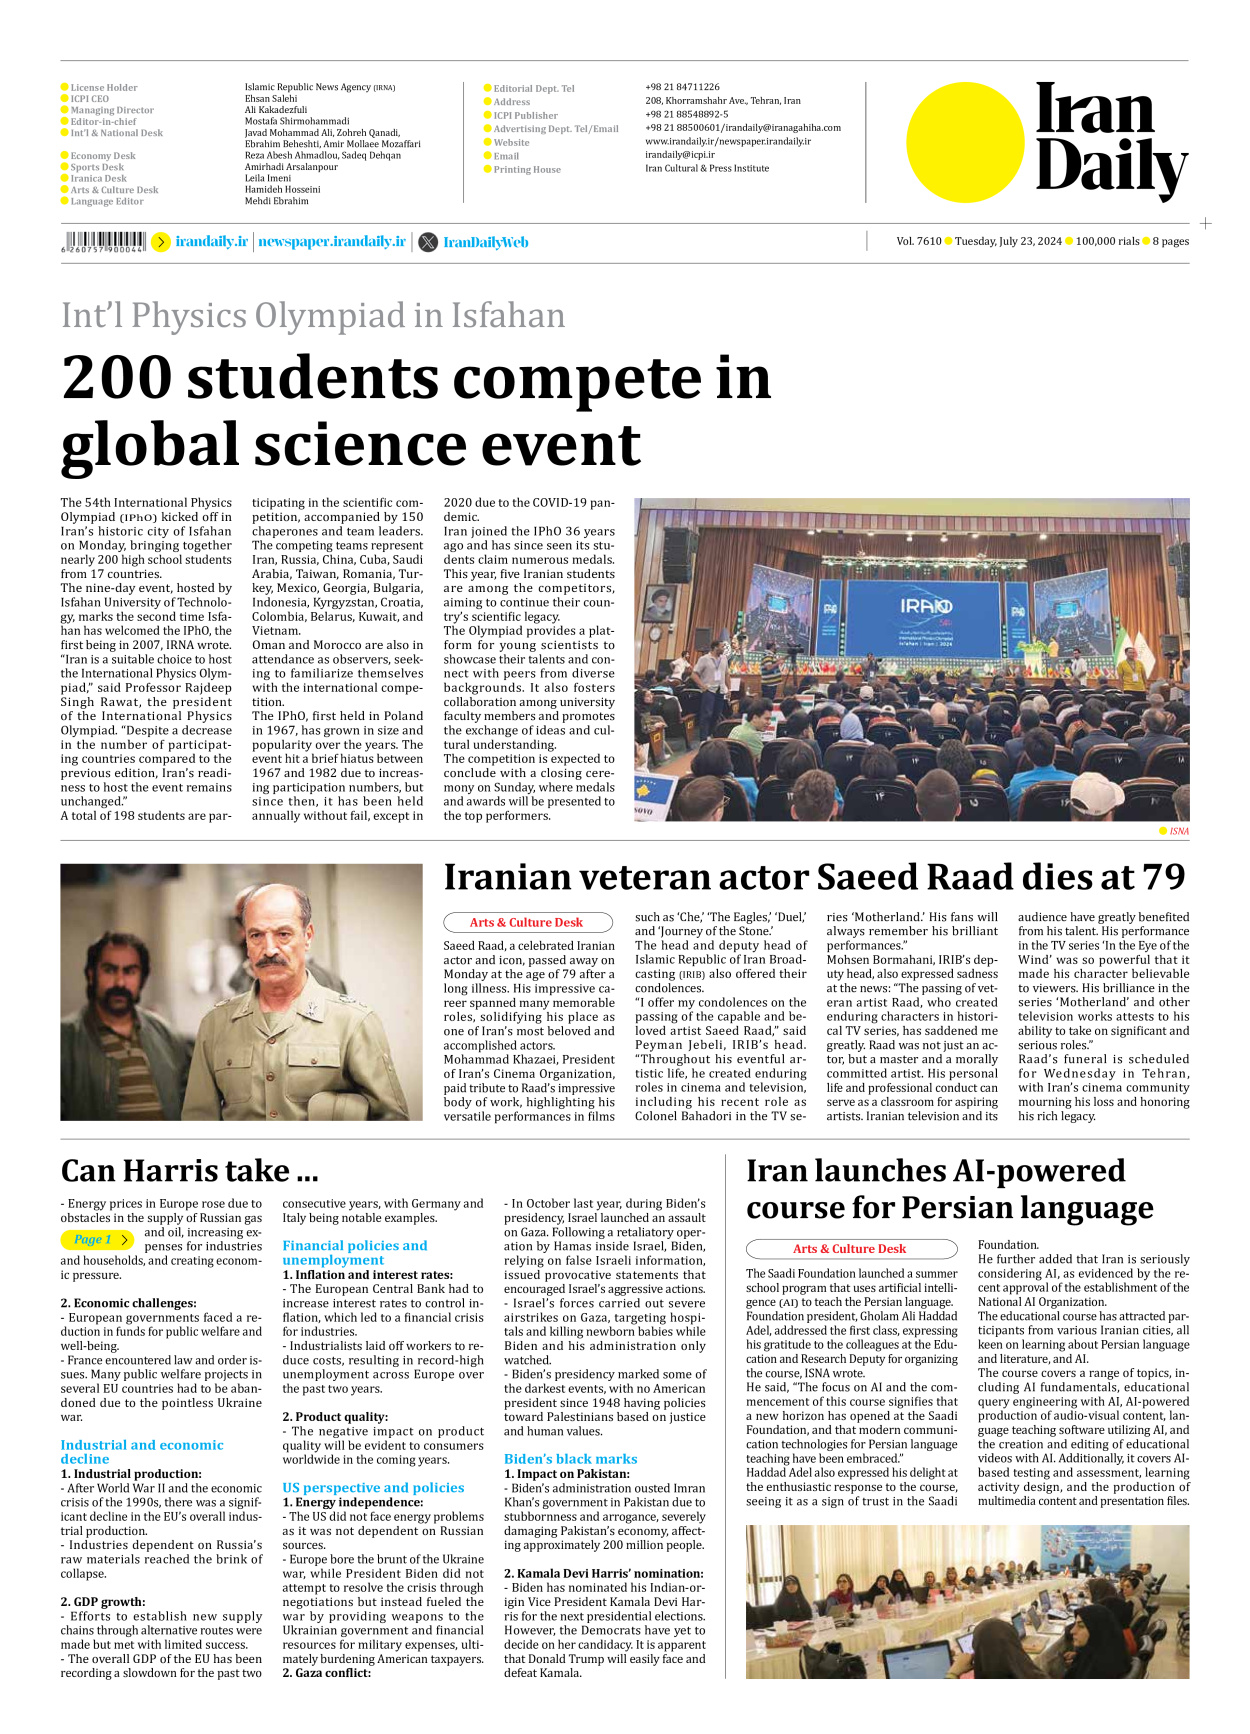 Iran Daily - Number Seven Thousand Six Hundred and Ten - 23 July 2024 - Page 8